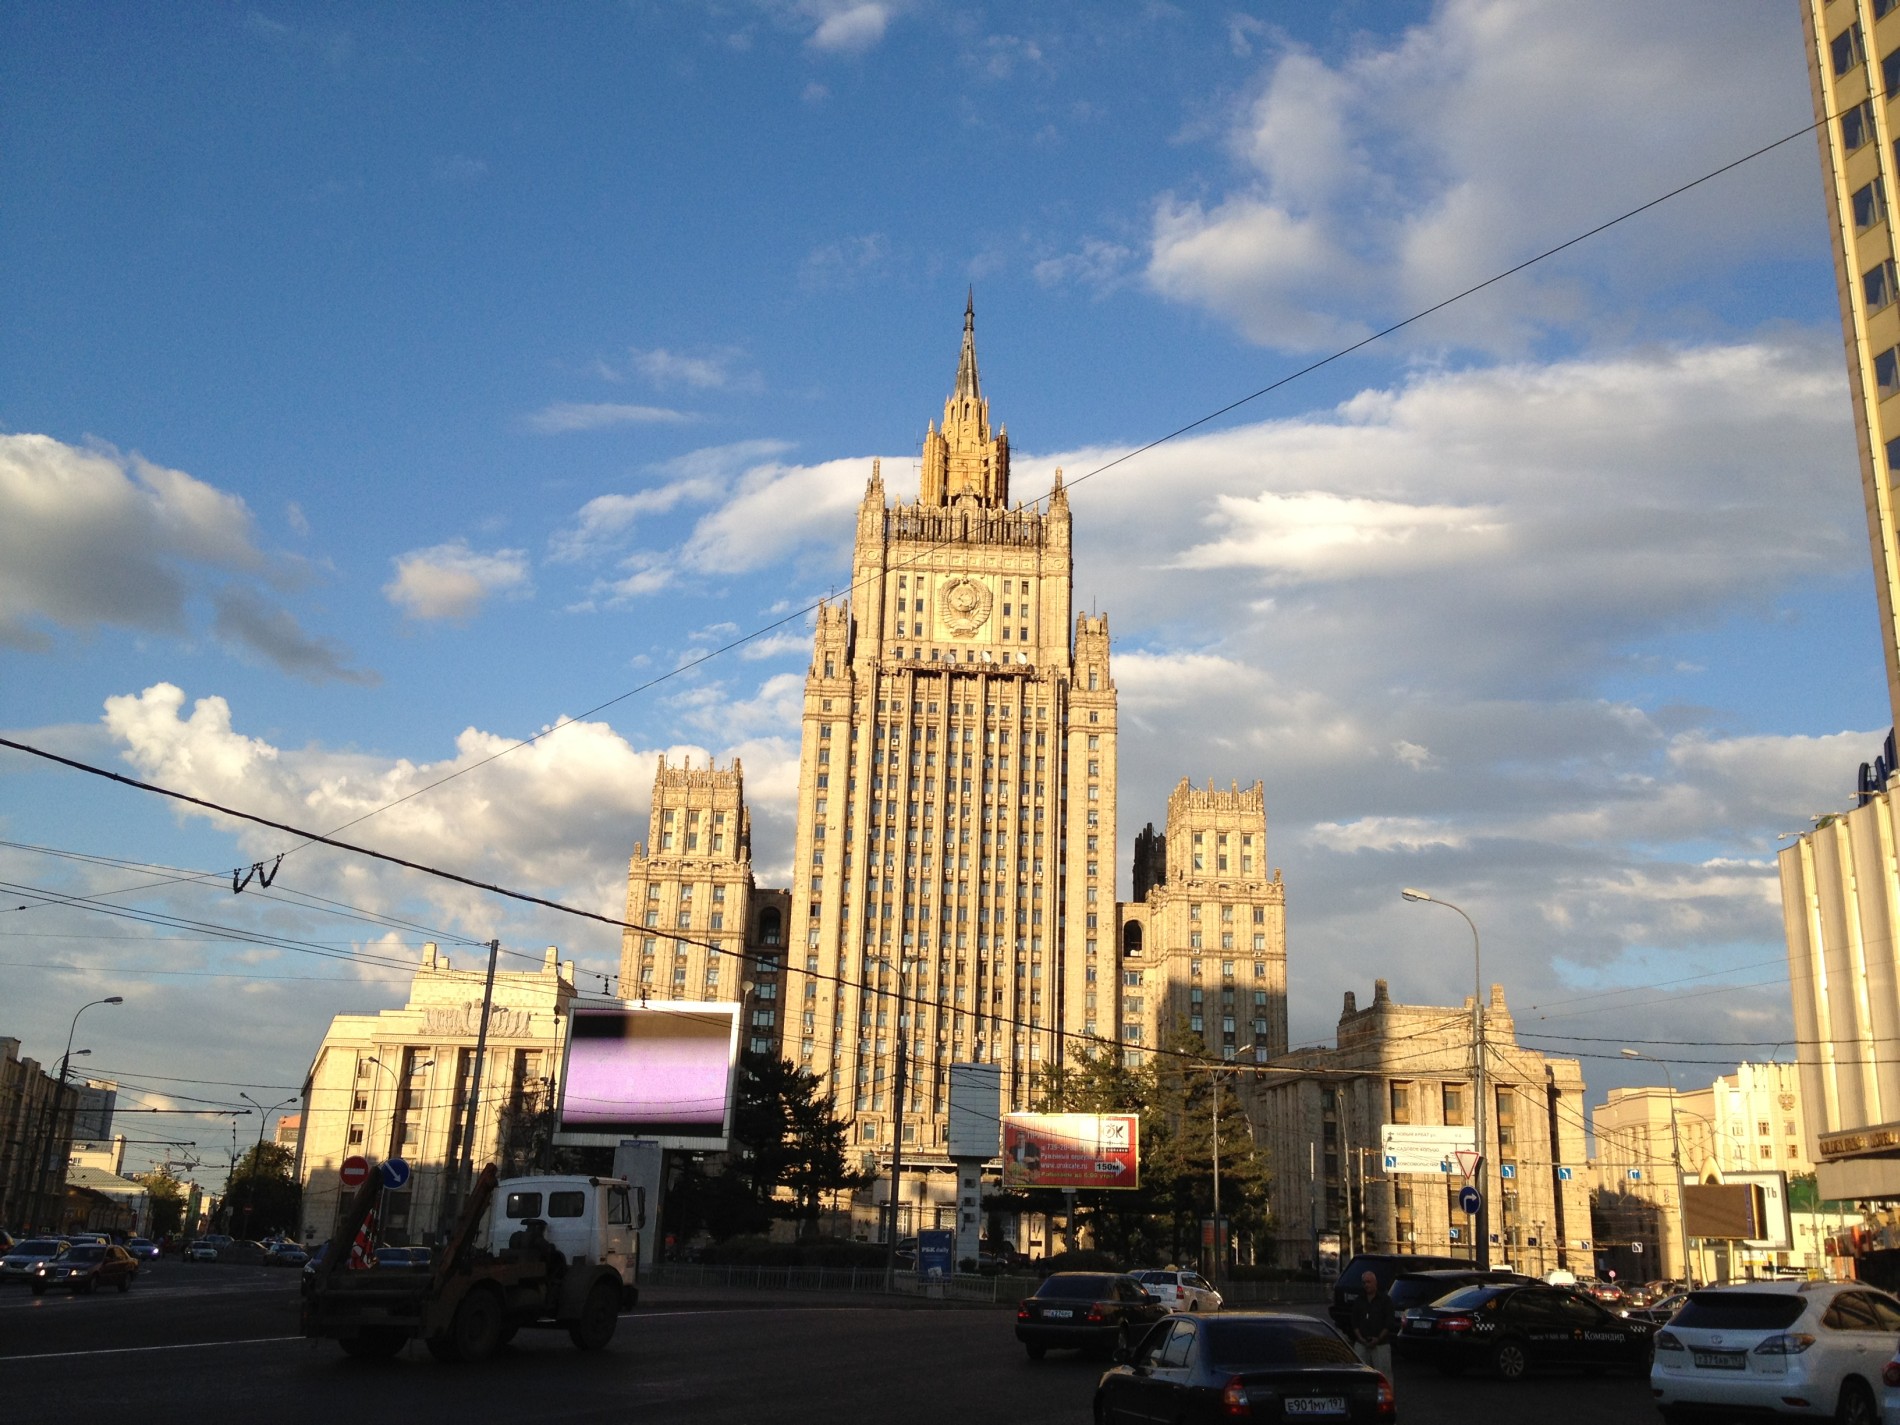 A Stalinist skyscraper sits on a block in Moscow, Russia.